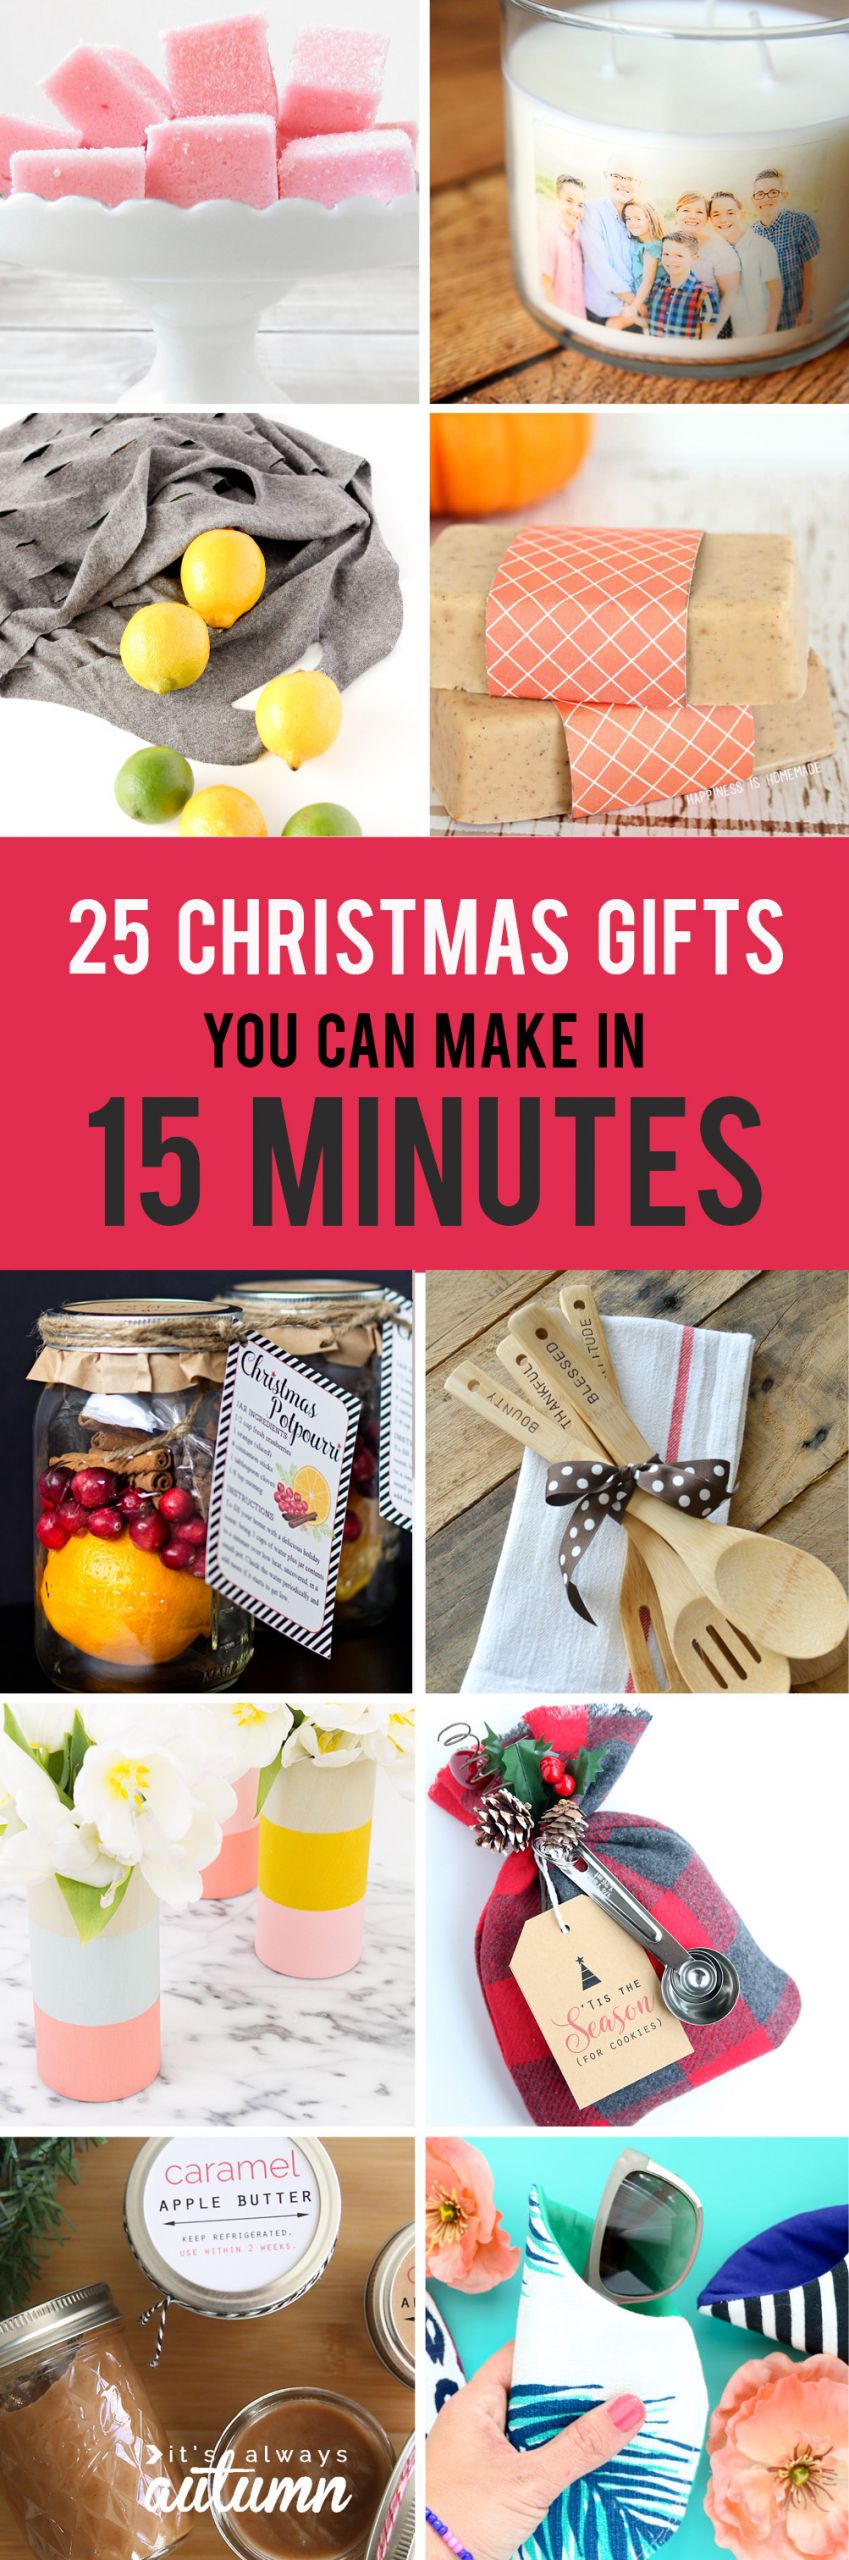 Xmas DIY Gifts
 25 easy homemade Christmas ts you can make in 15